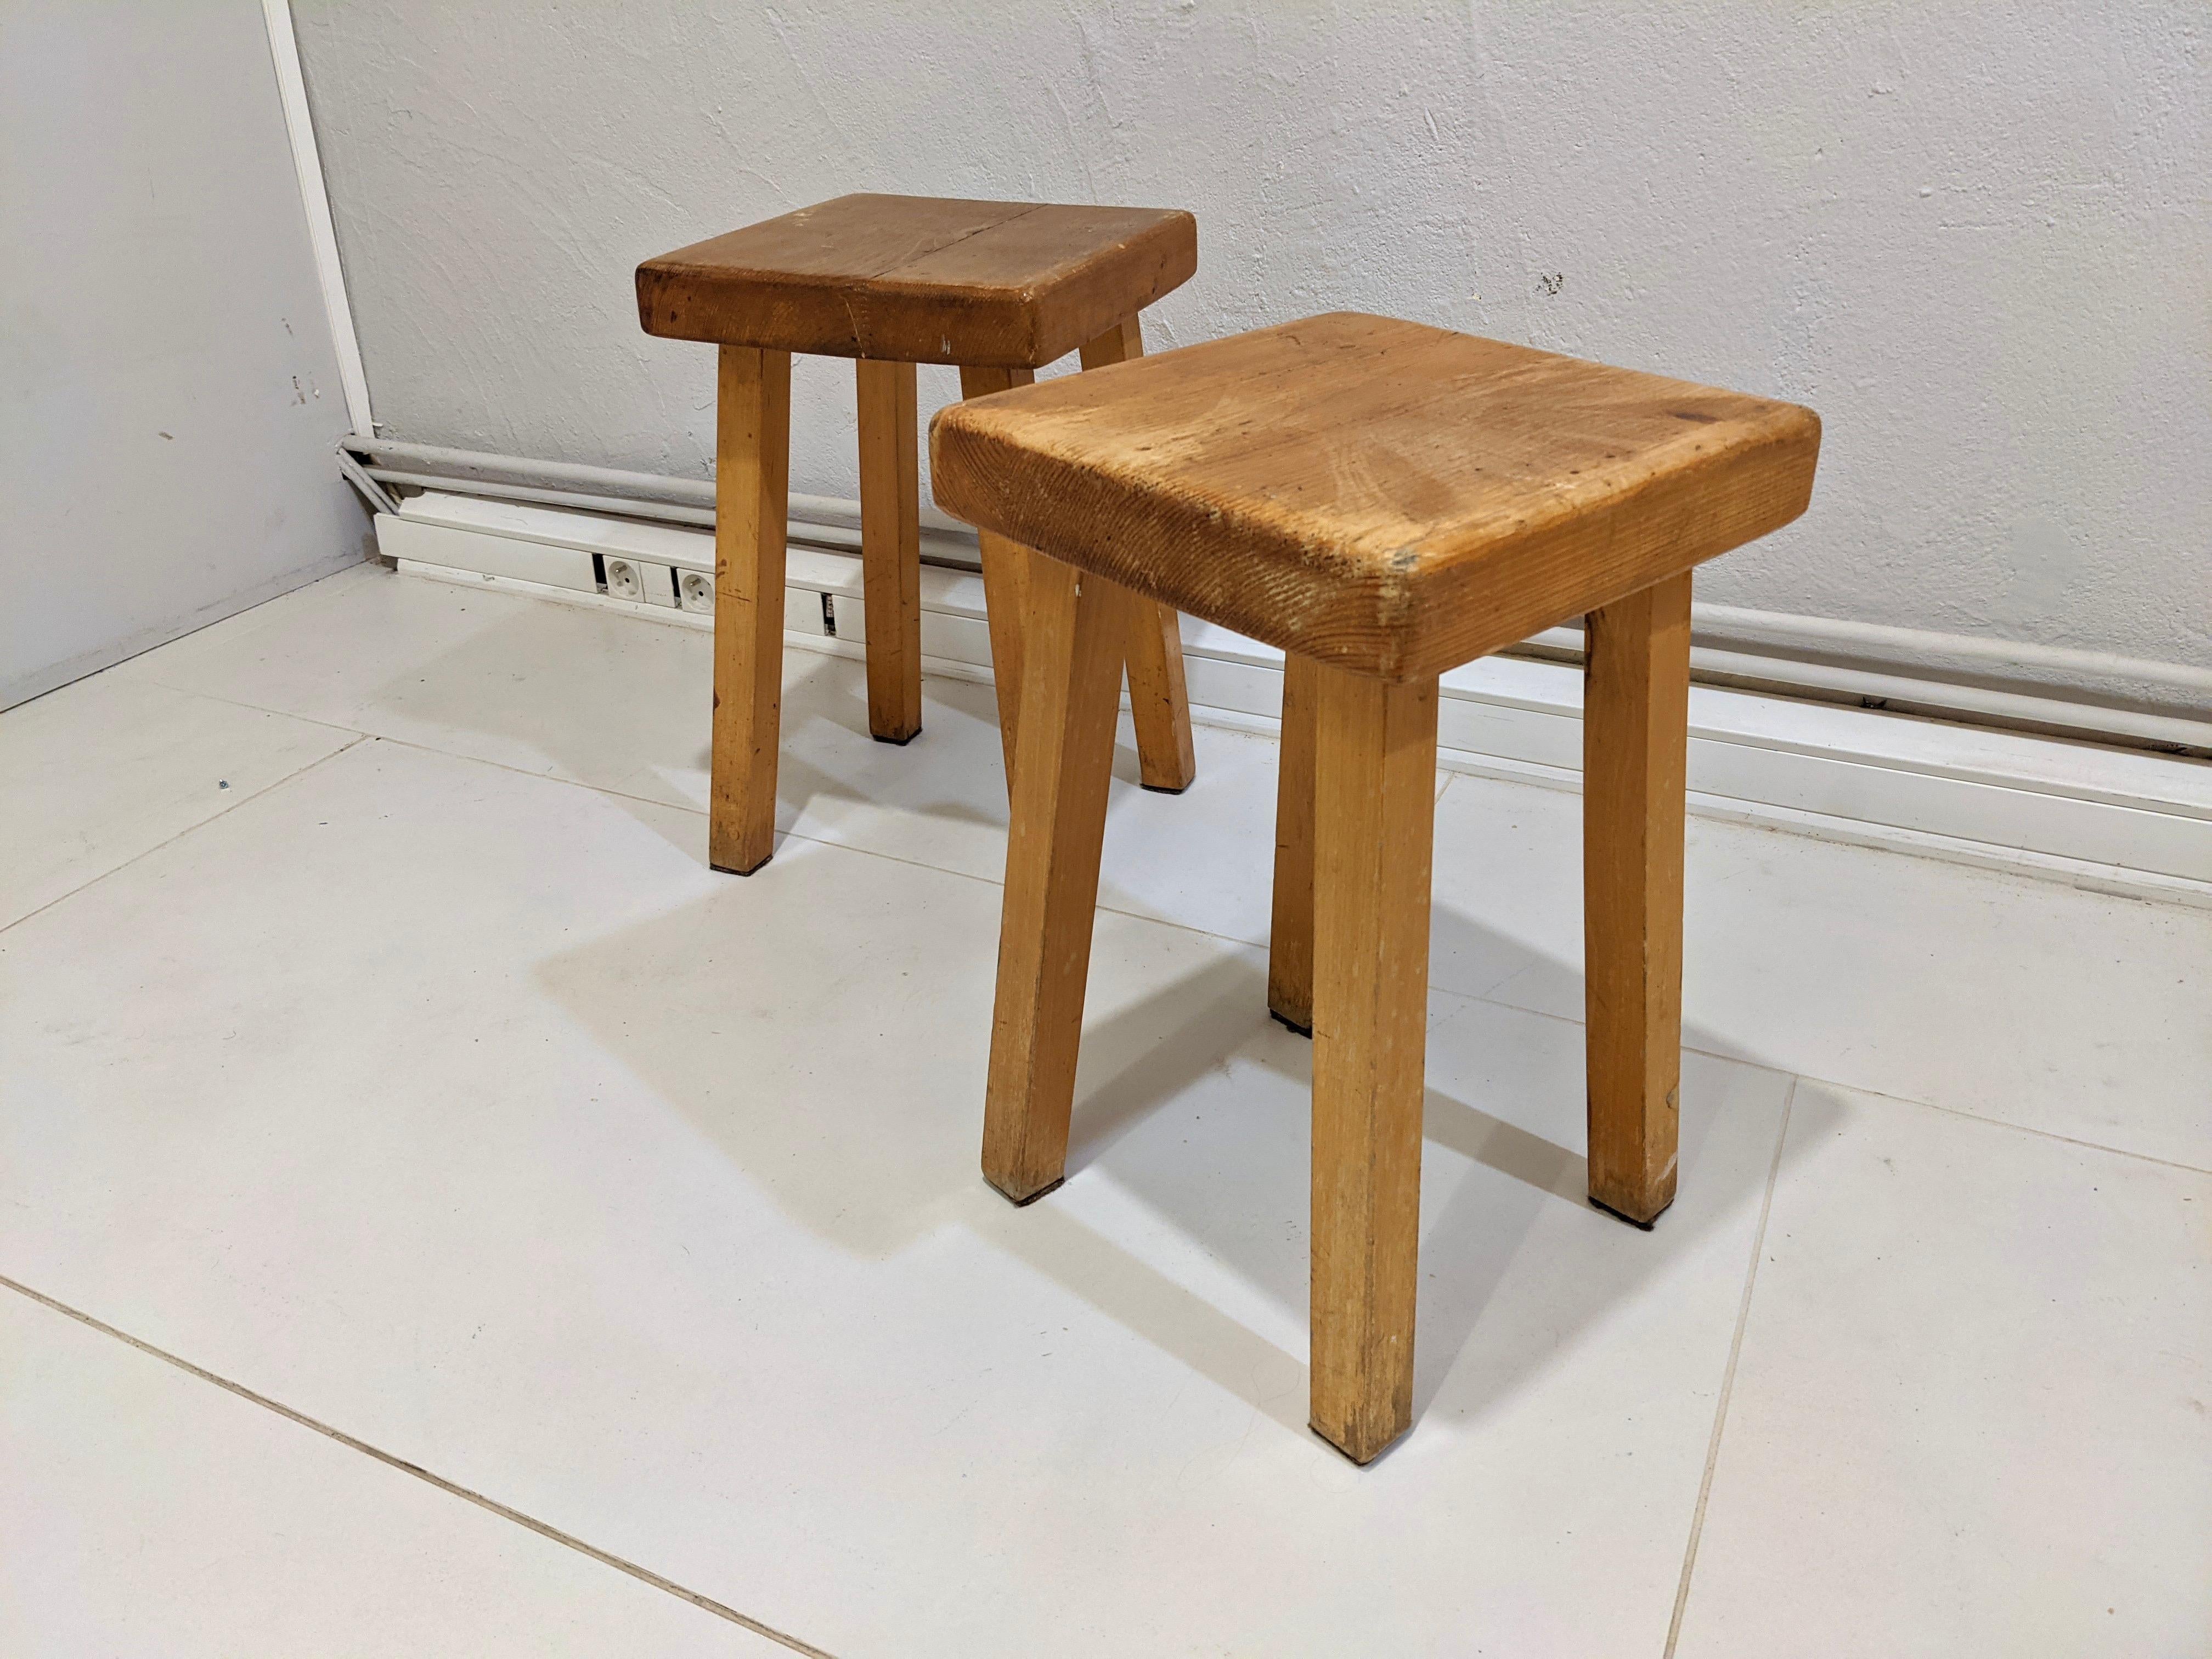 Set of 2 stools in pine wood by Charlotte Perriand for Les Arcs 1800. Square seat. Quadripod base.
Provenance : residence l'Aiguille Grive. 1960's. Very good condition.

Bibliography : page 330, volume 4, the complete works by Jacques Barsac.